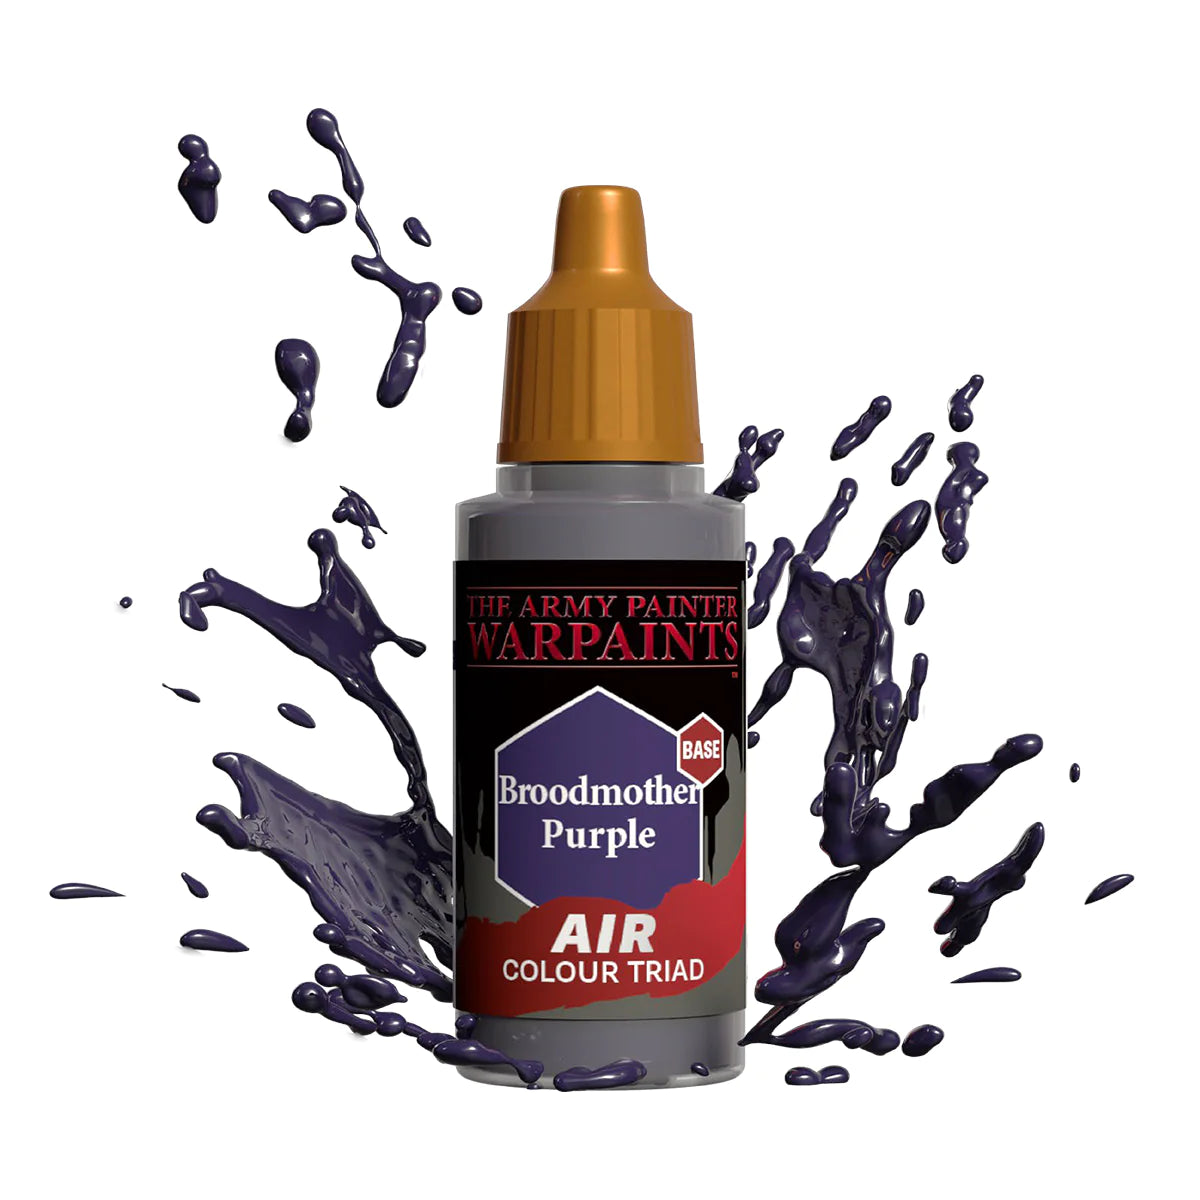 Air Broodmother Purple Army Painter Warpaints